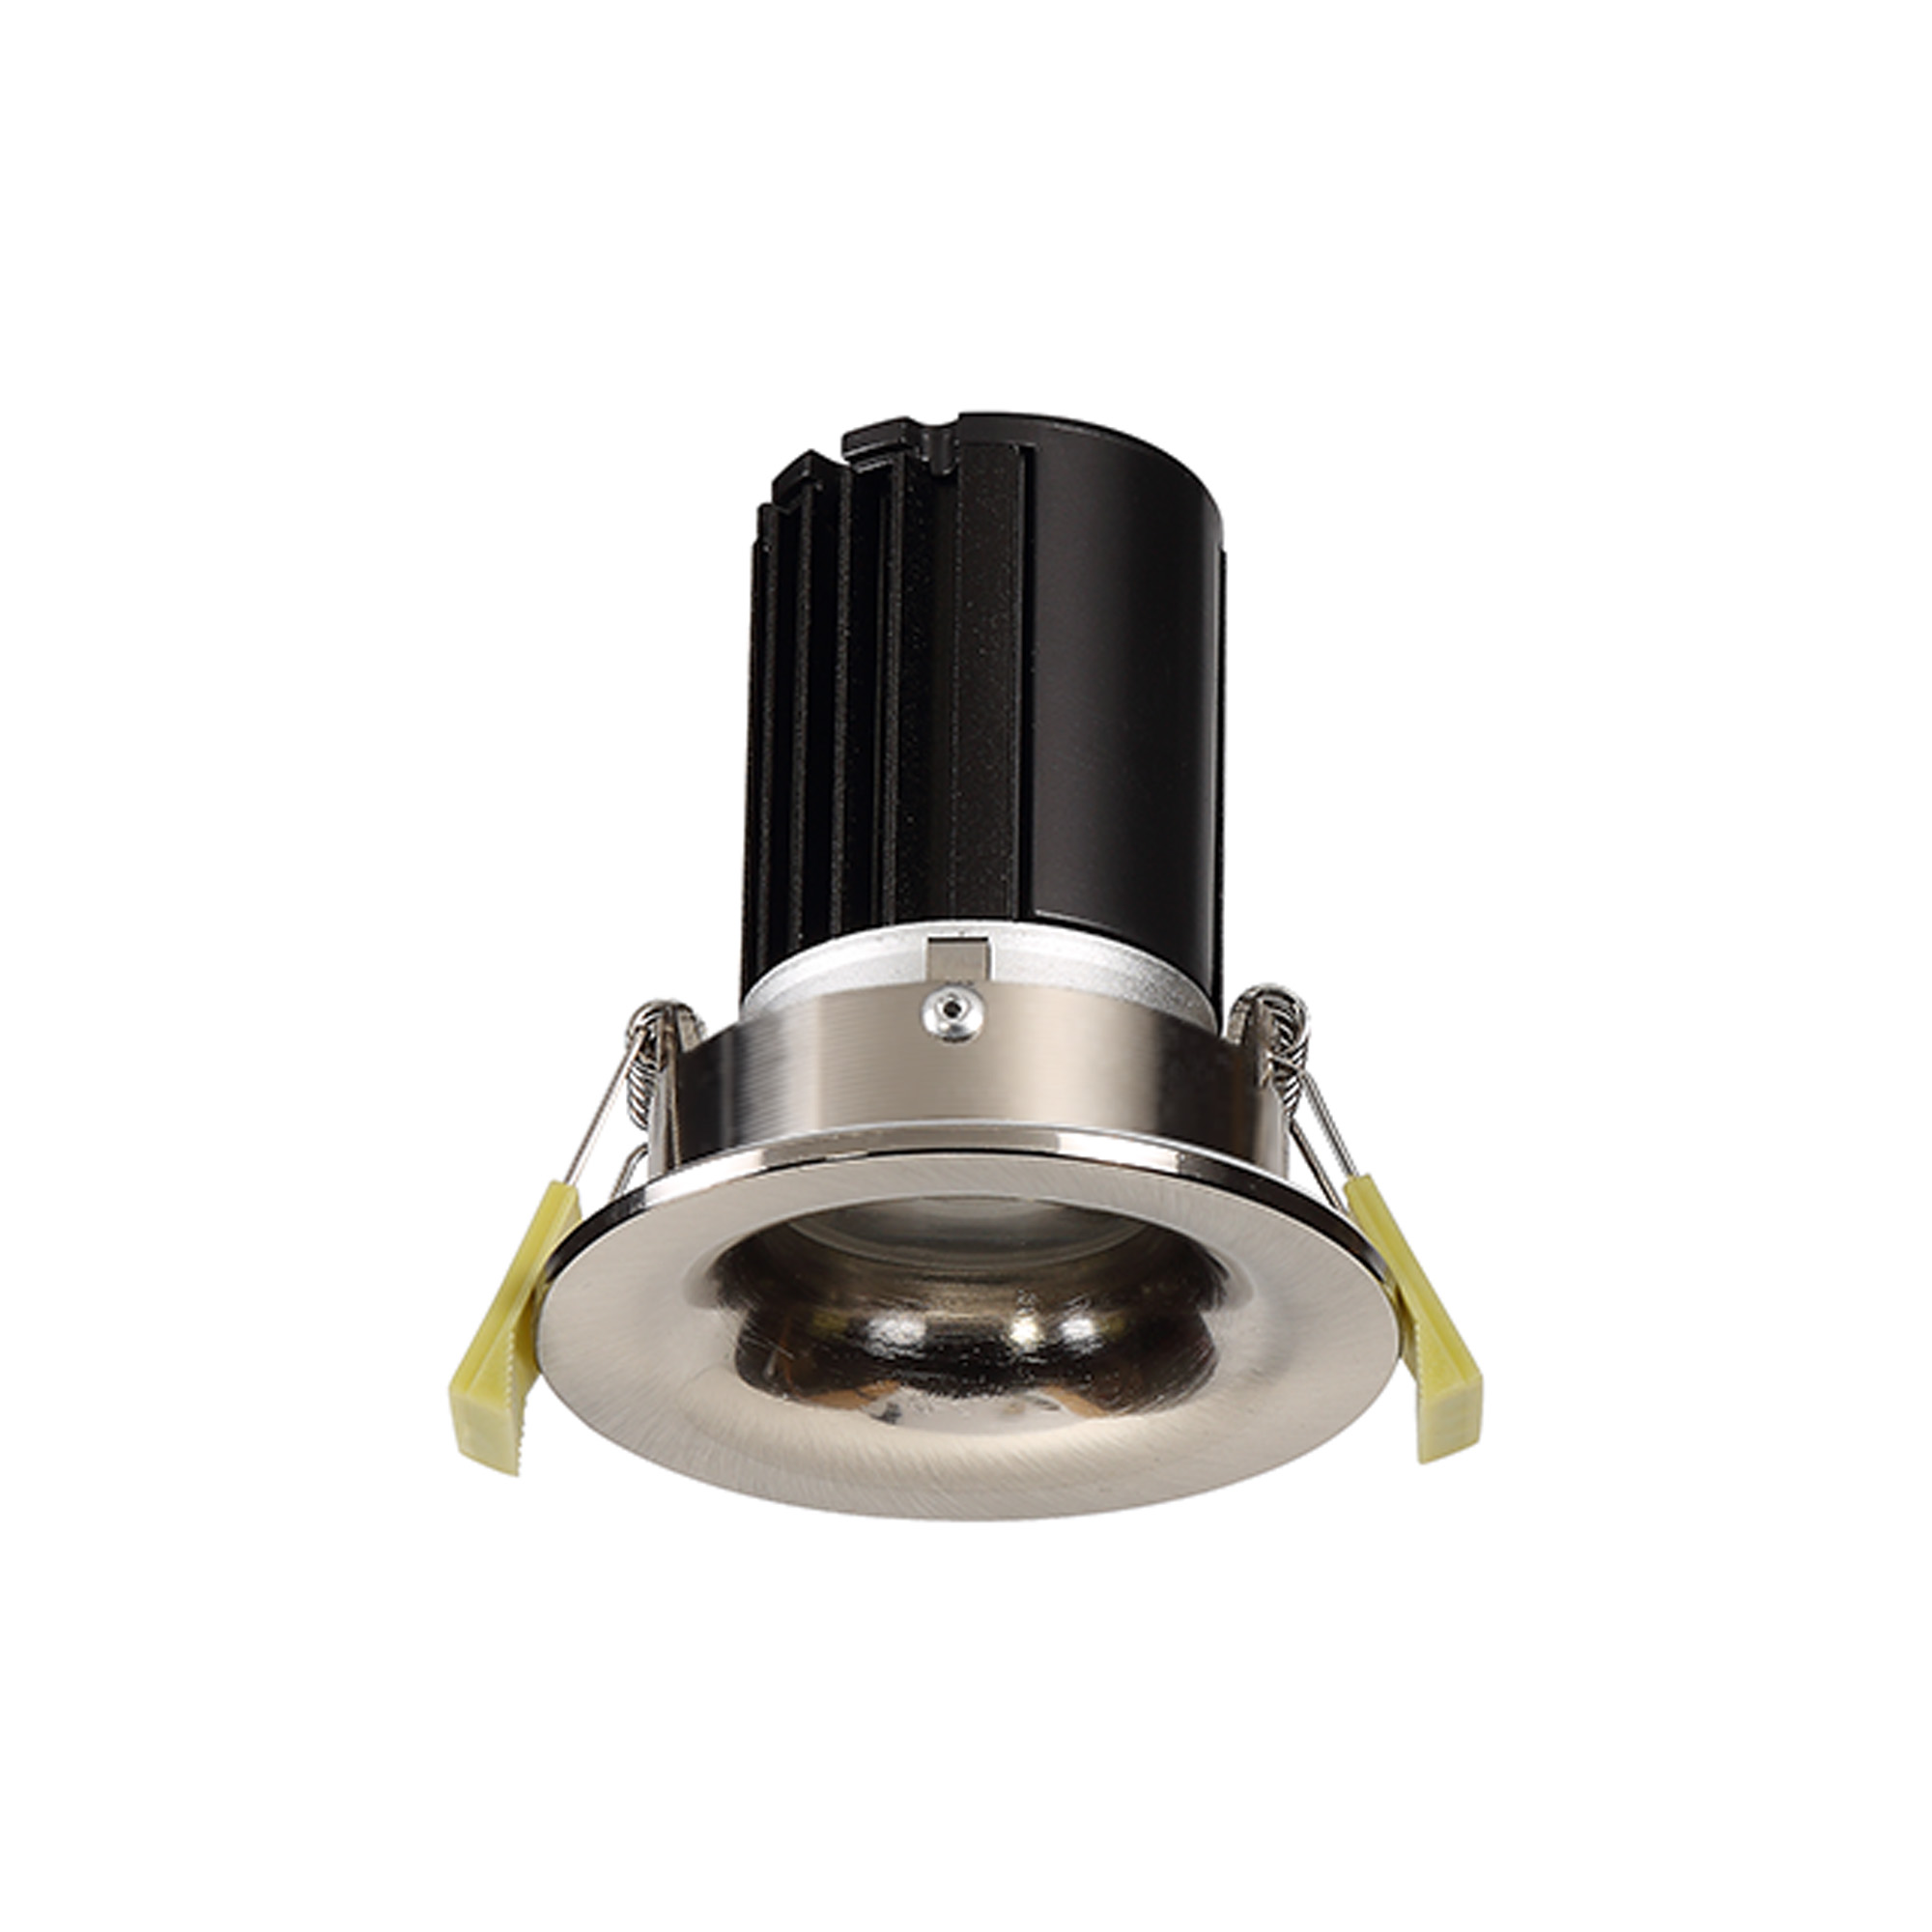 DM201474  Bruve 9 Tridonic powered 9W 2700K 700lm 24° LED Engine,250mA , CRI>90 LED Engine  Satin Nickel Fixed Round Recessed Downlight, Inner Glass cover, IP65